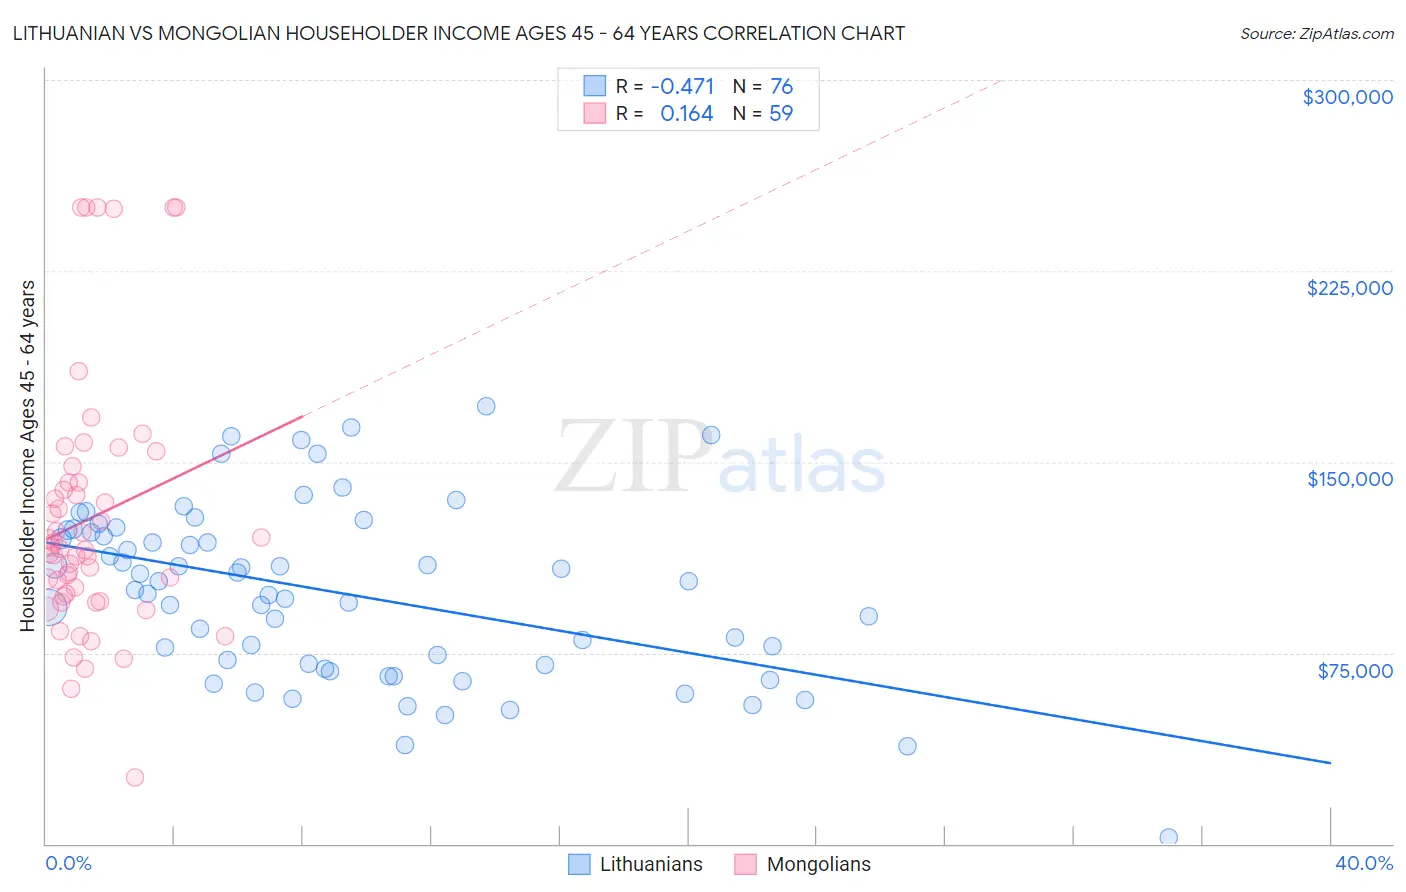 Lithuanian vs Mongolian Householder Income Ages 45 - 64 years